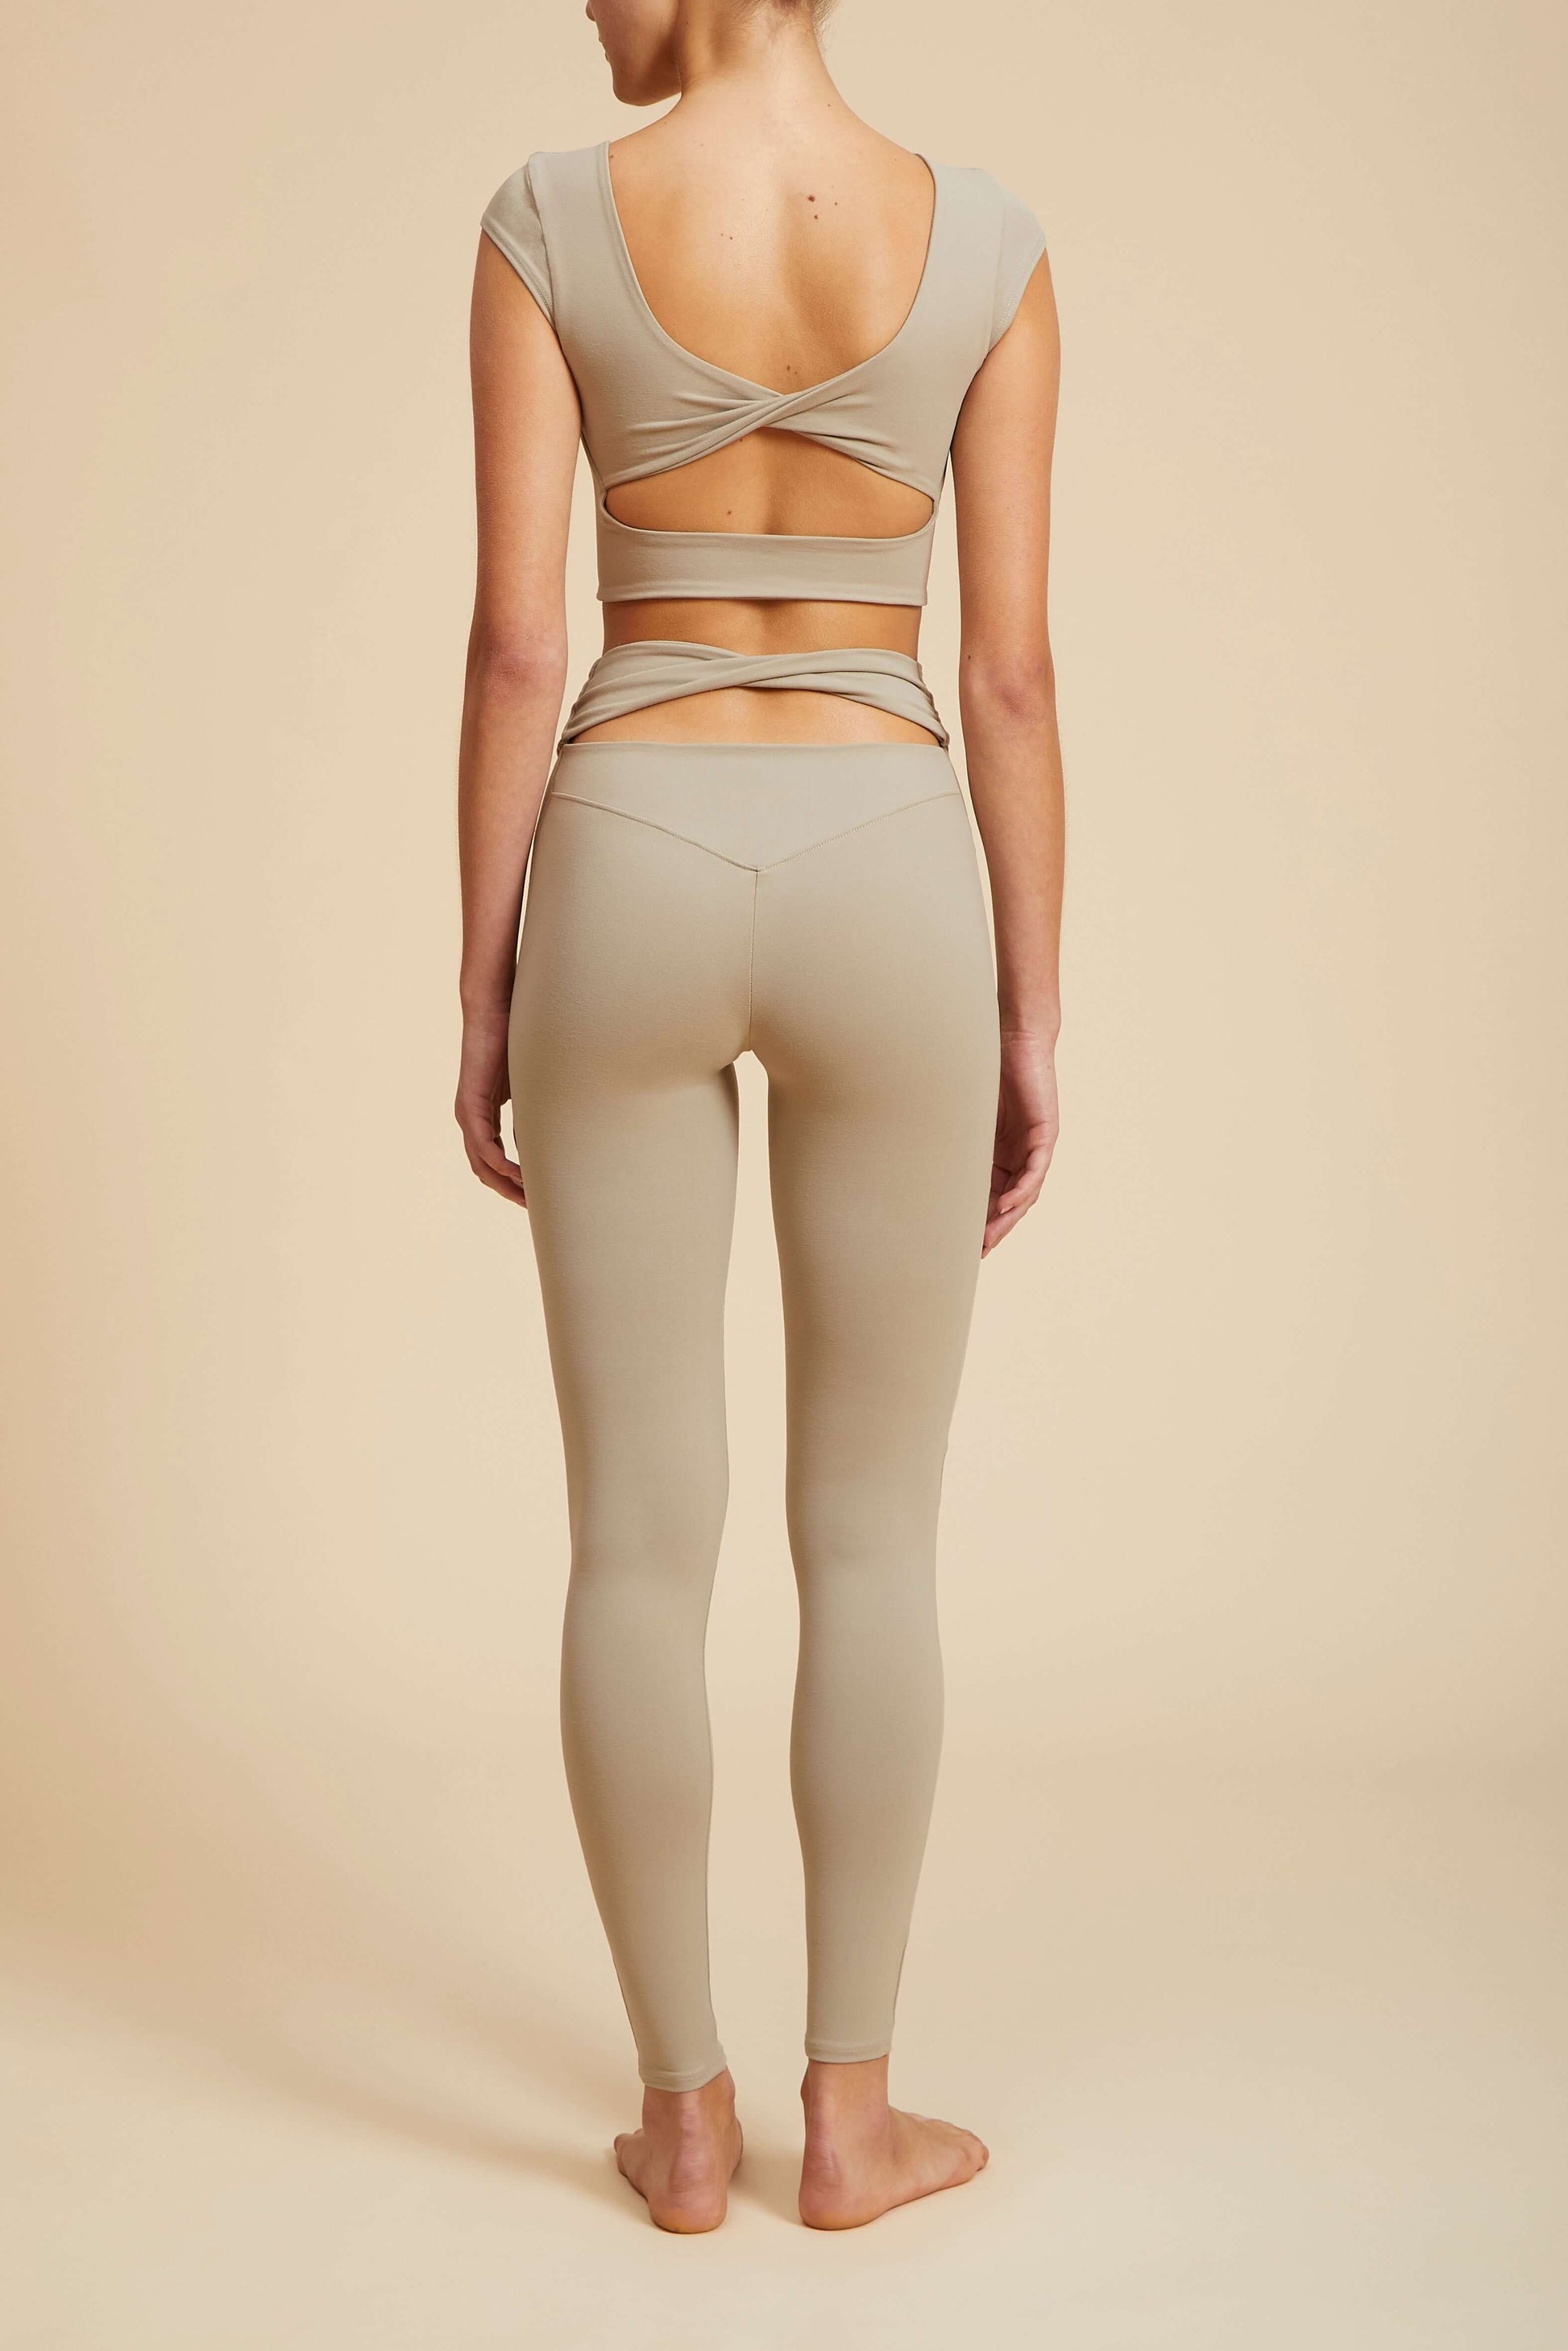 Live The Process Jet Legging. Game changer. Twist and shout in our Jet Legging, a high waisted stunner with a surprise twist in the back to flash just a sliver of skin.